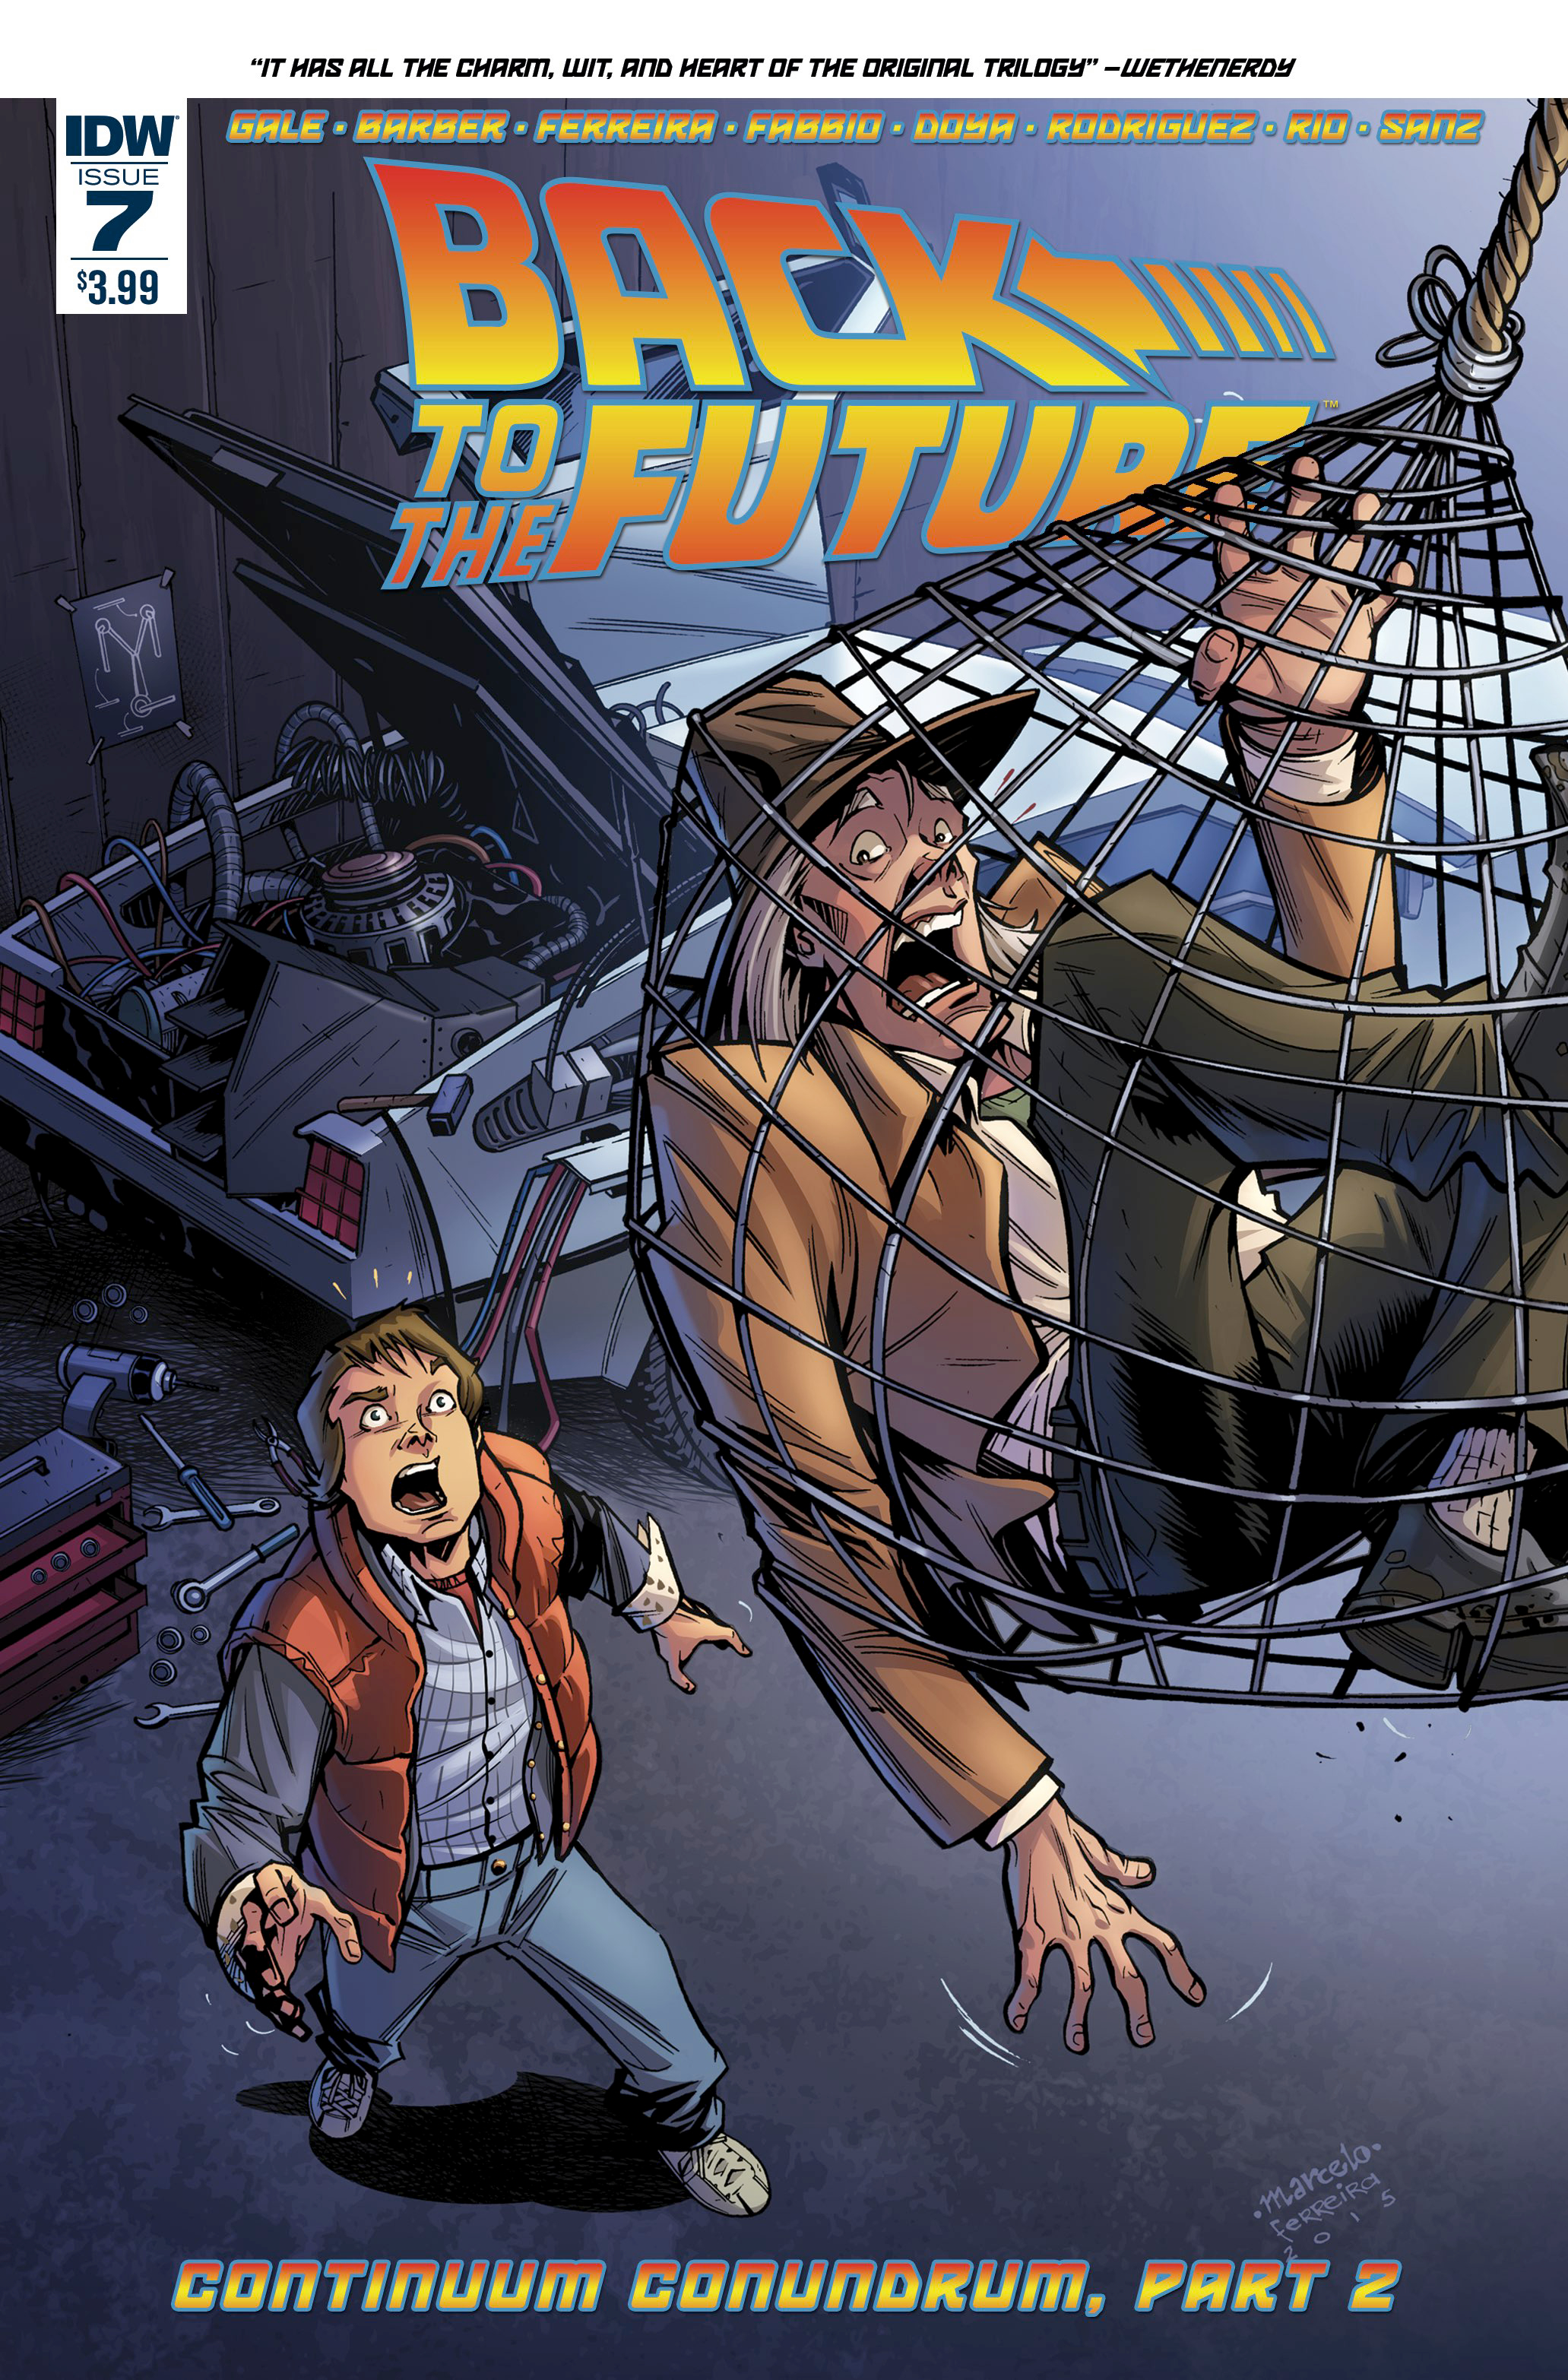 BACK TO THE FUTURE #7